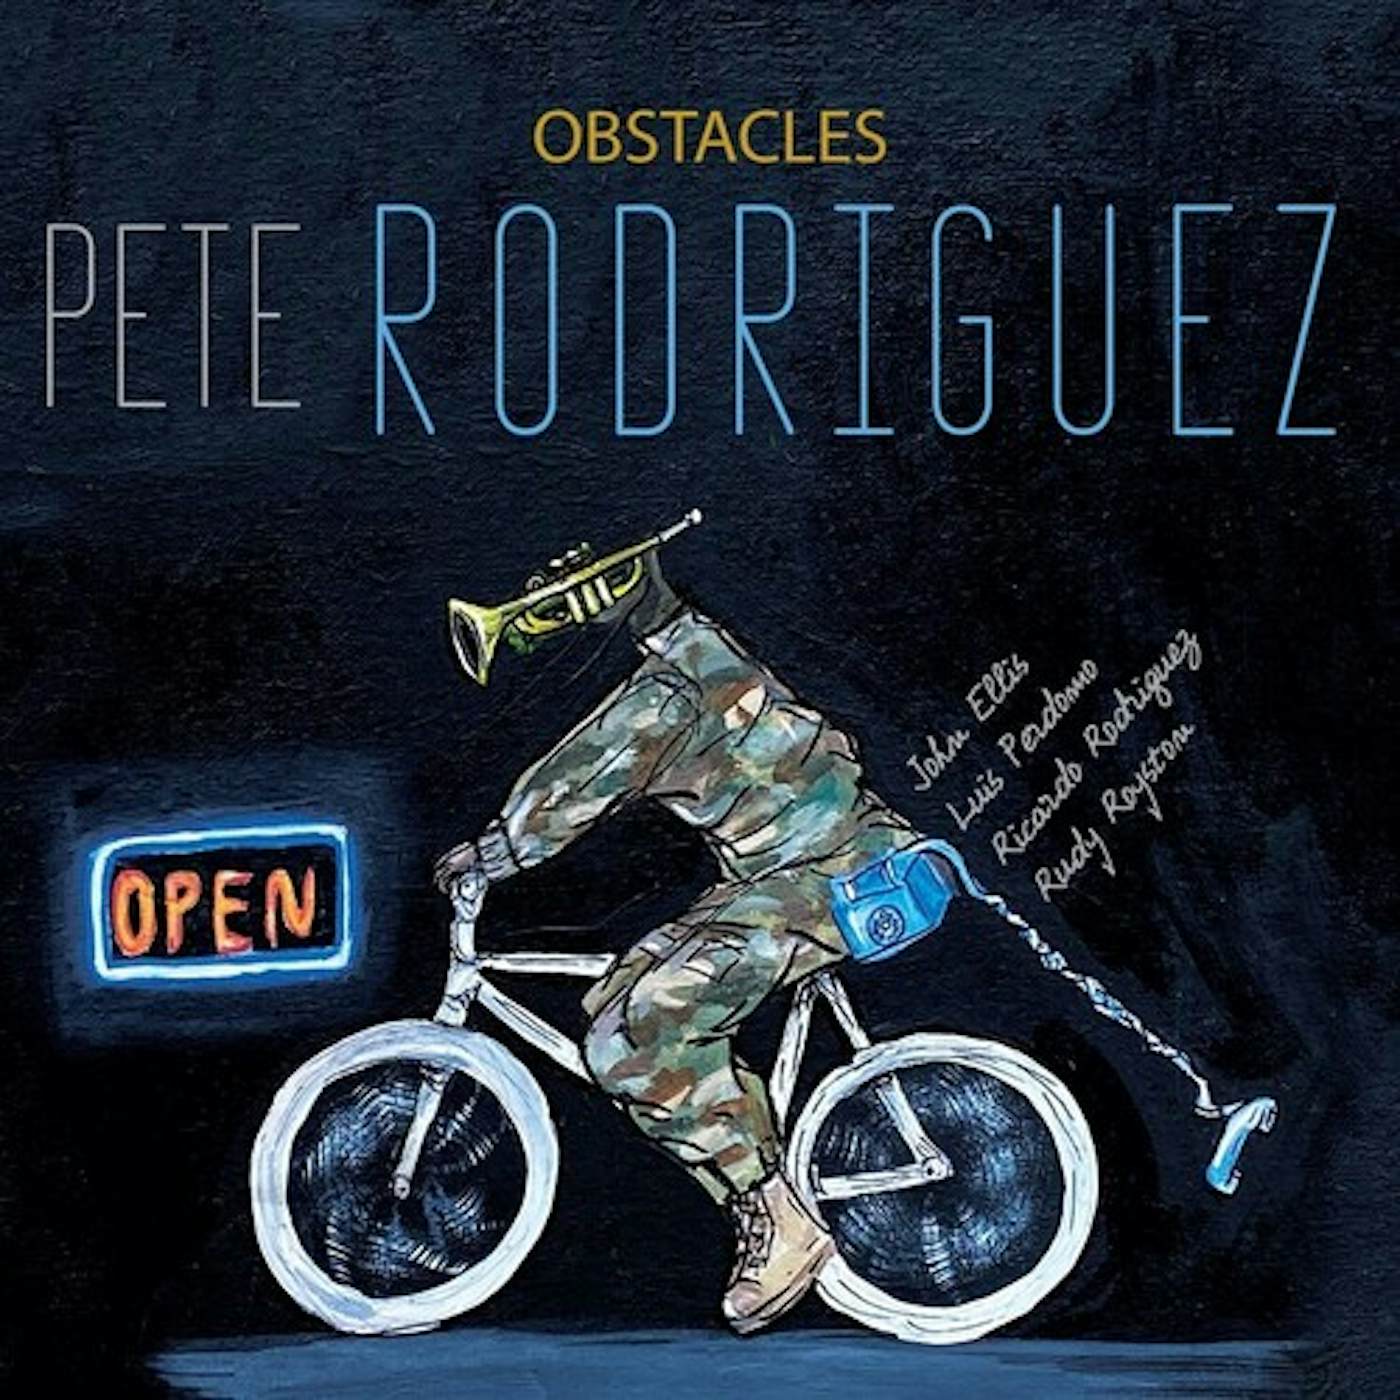 Pete Rodriguez OBSTACLES CD